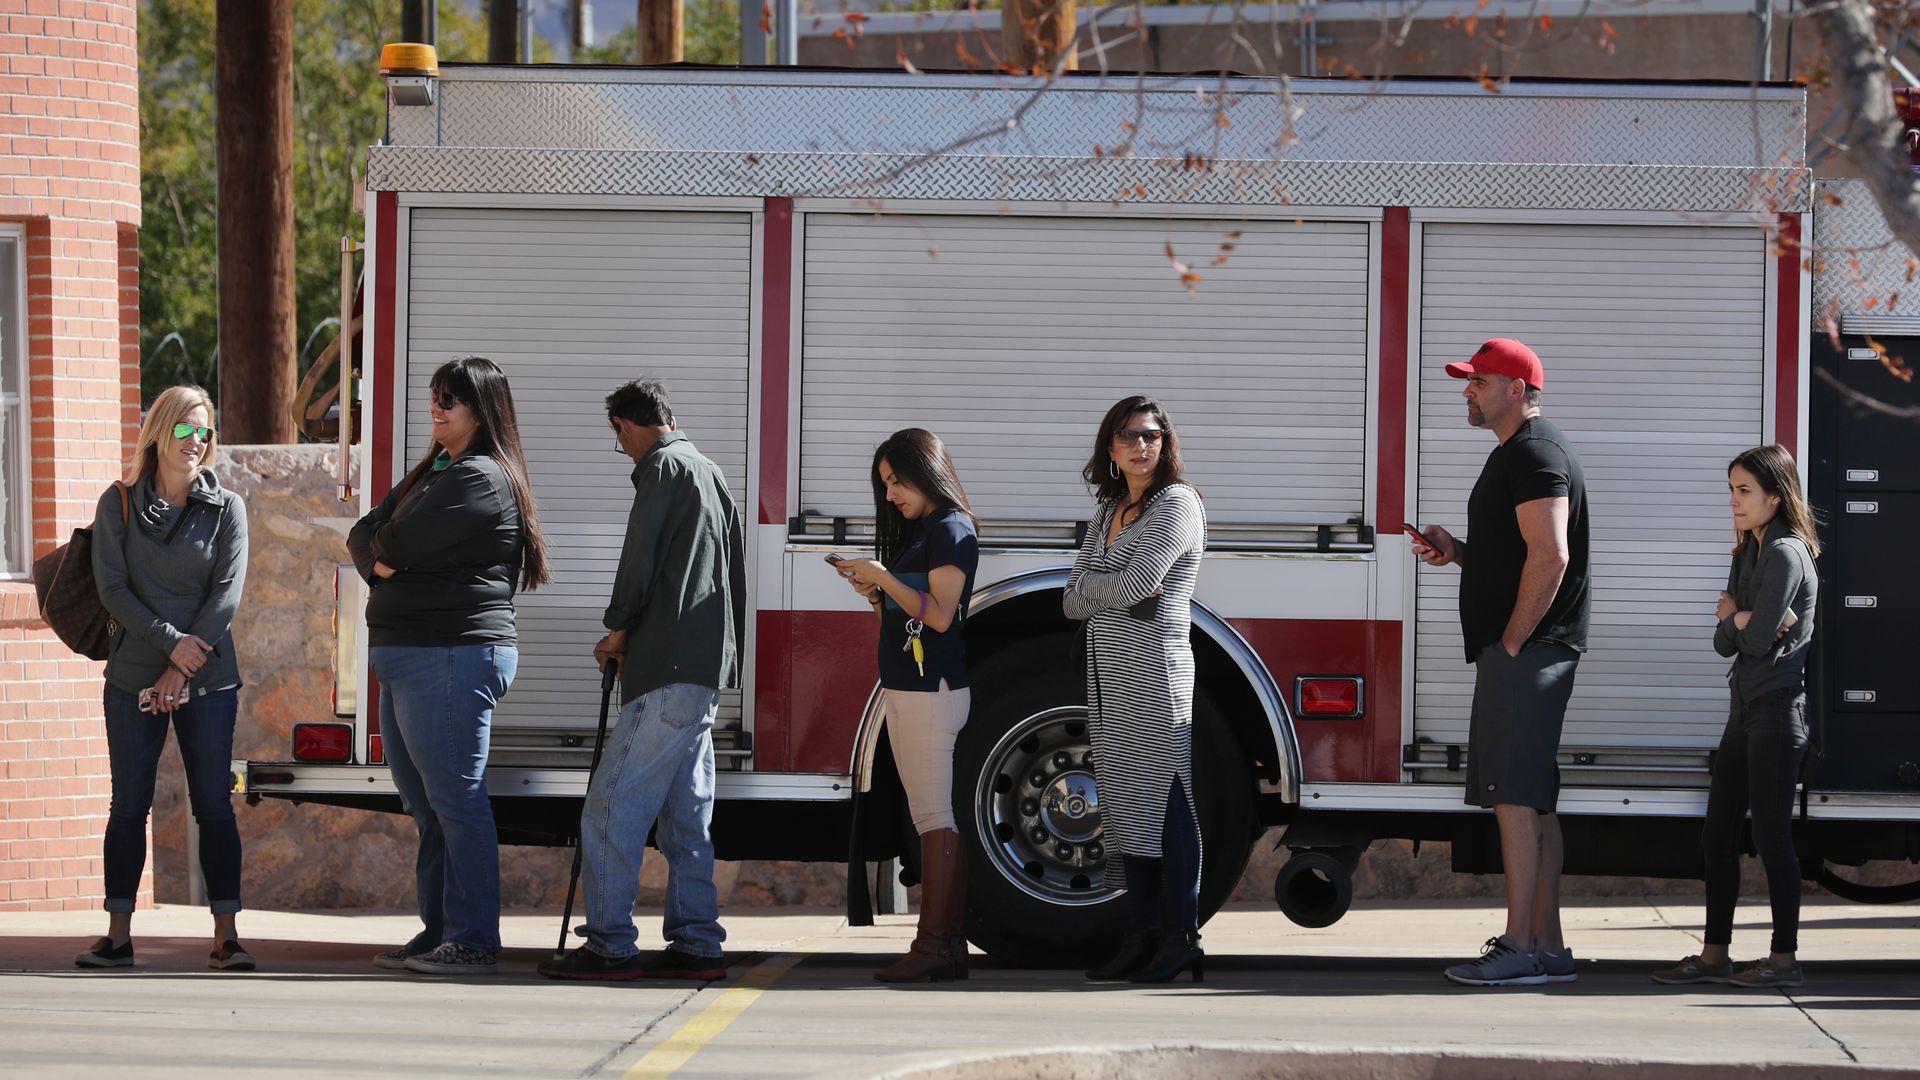 Voters are seen lining up outside a Texas fire station during an election in 2018.